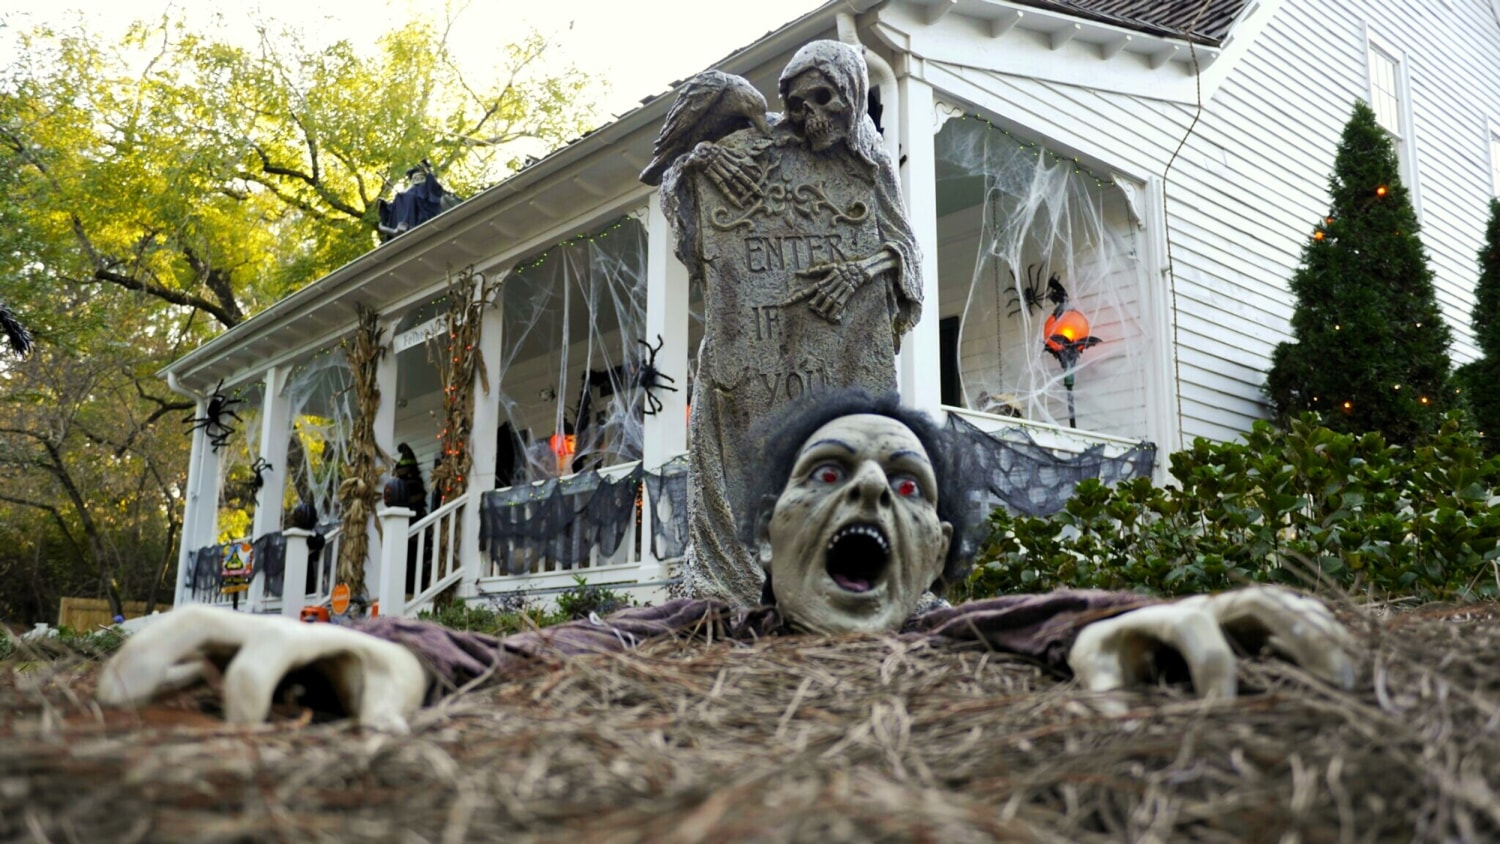 Scary Home Decor Products Perfect For Decorating For Halloween